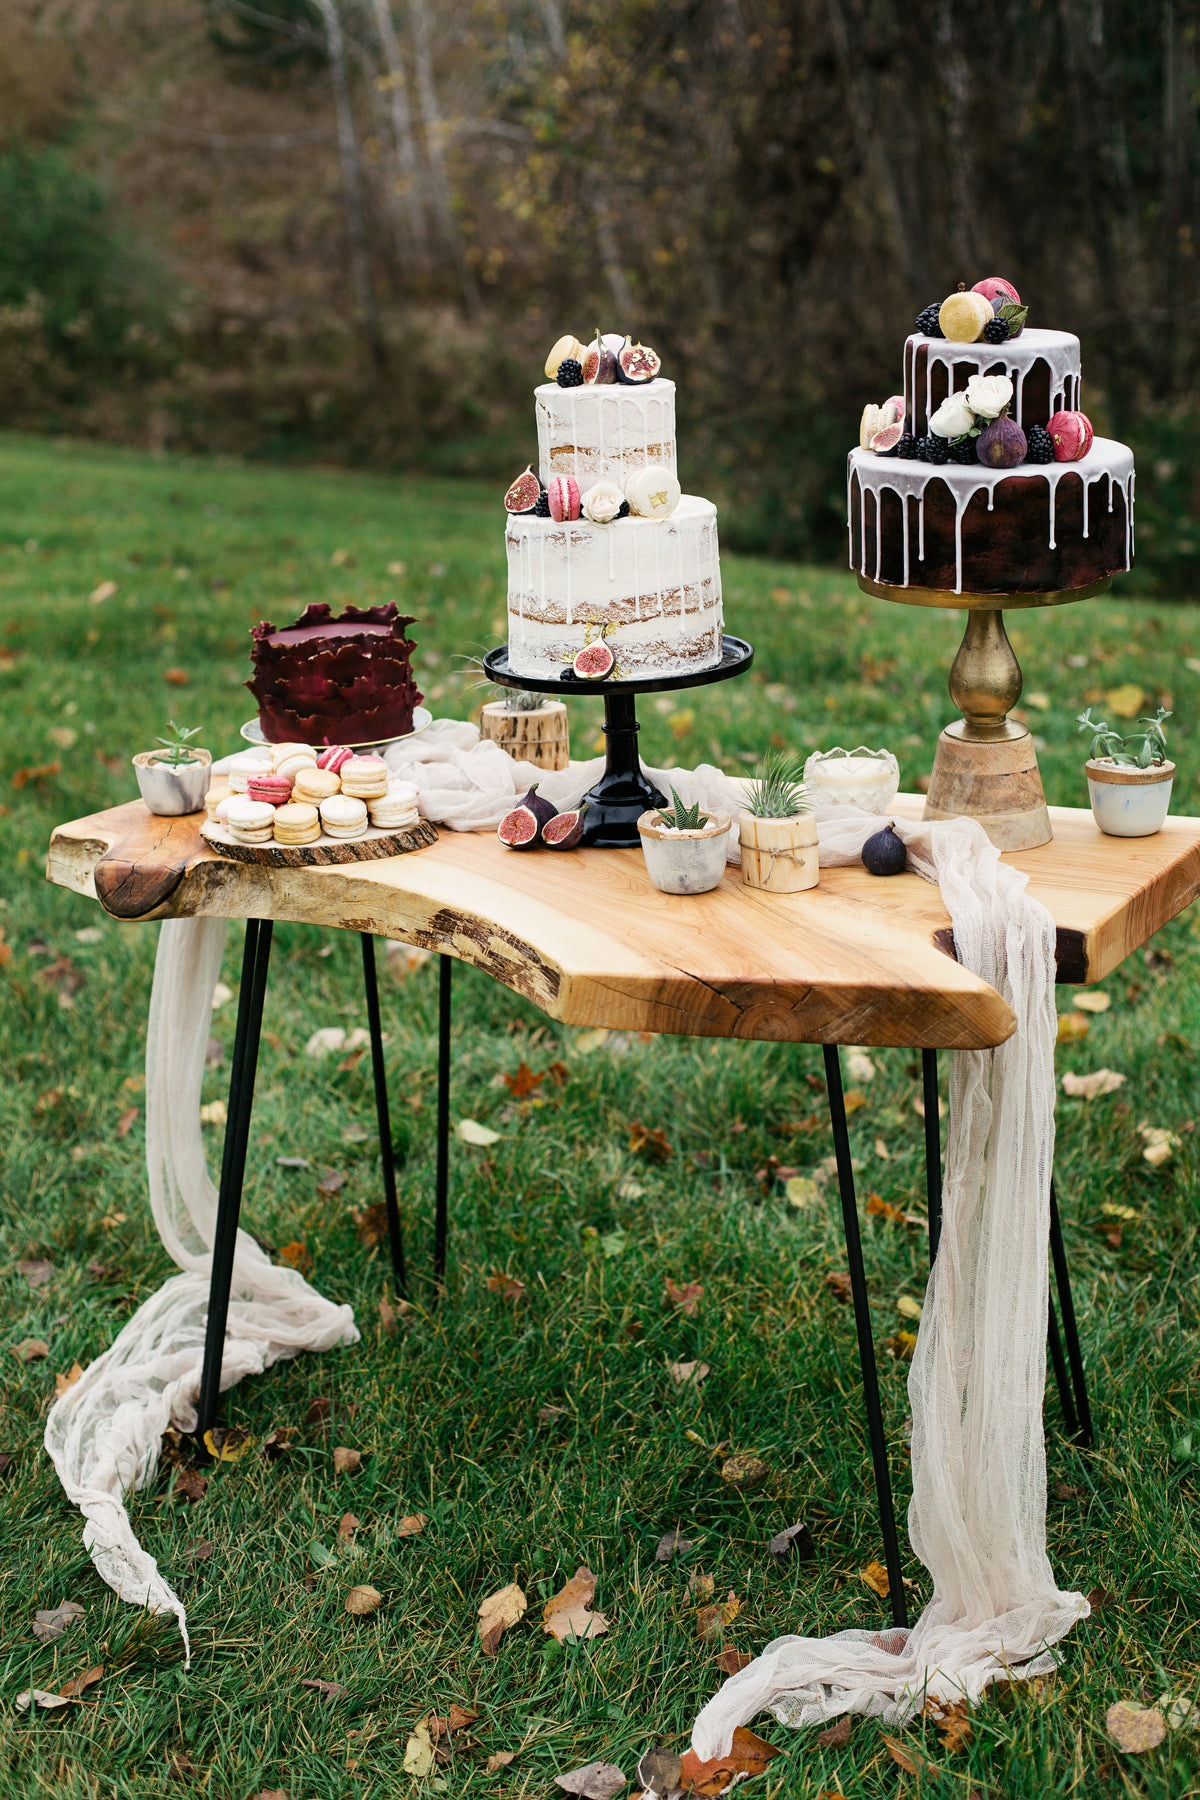 a stunning display of cakes and desserts on table